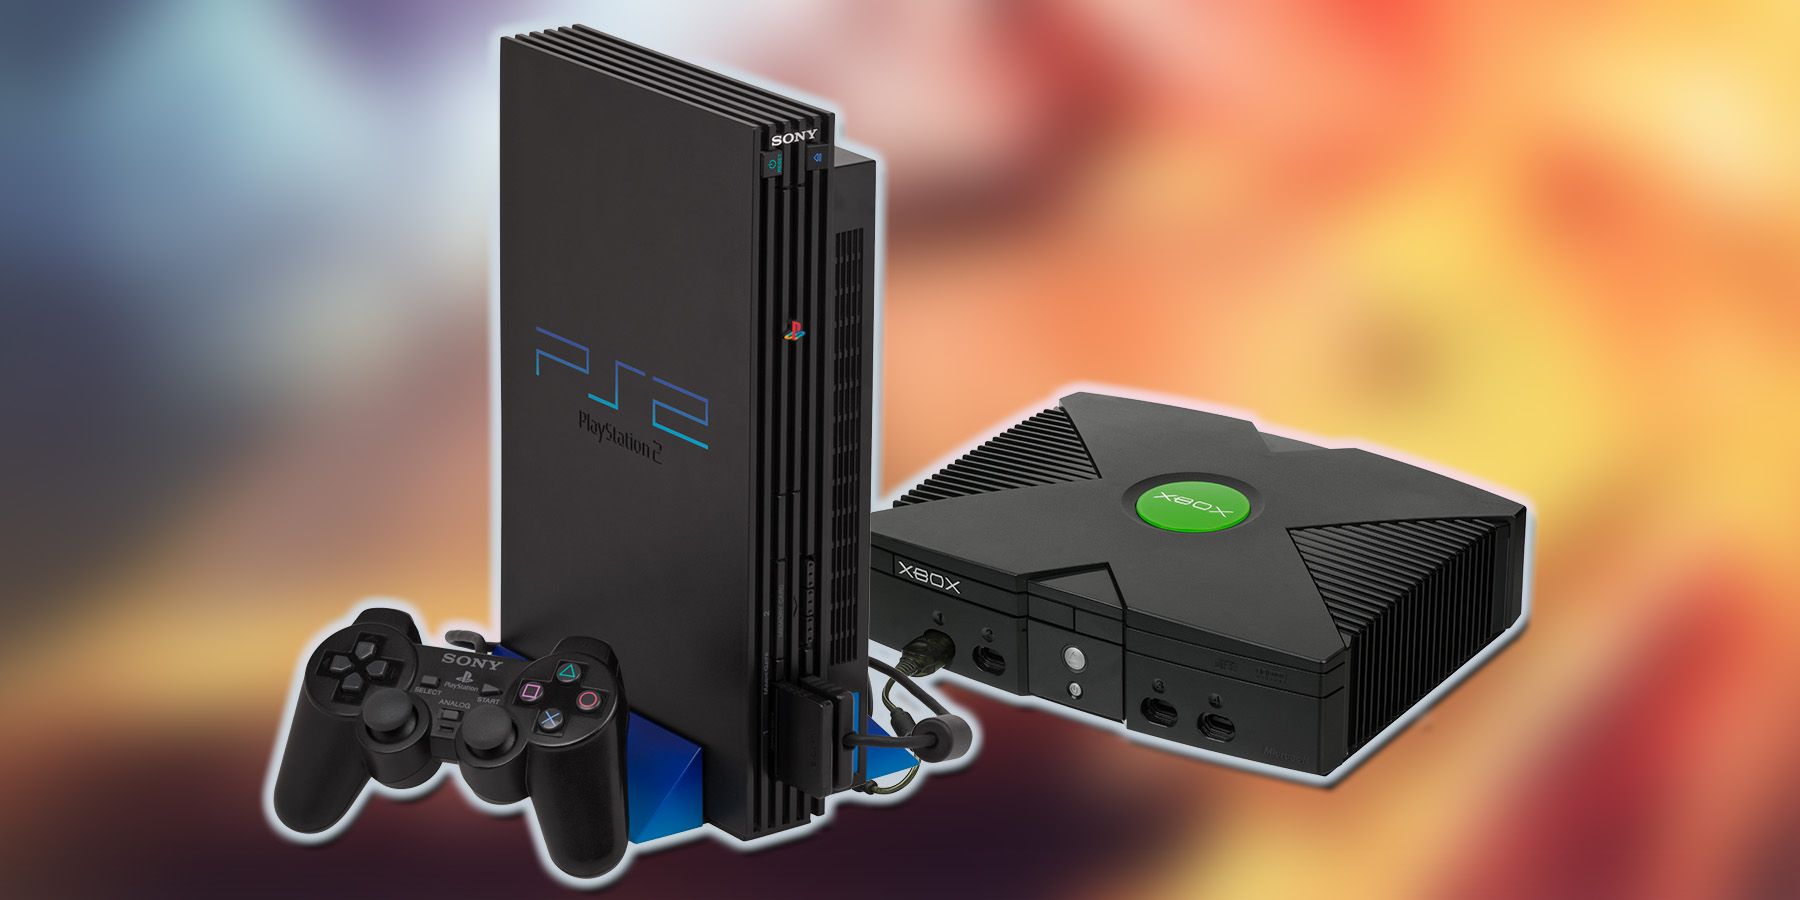 PlayStation 2 PS2 and original Xbox on blurred Flatout promo artwork